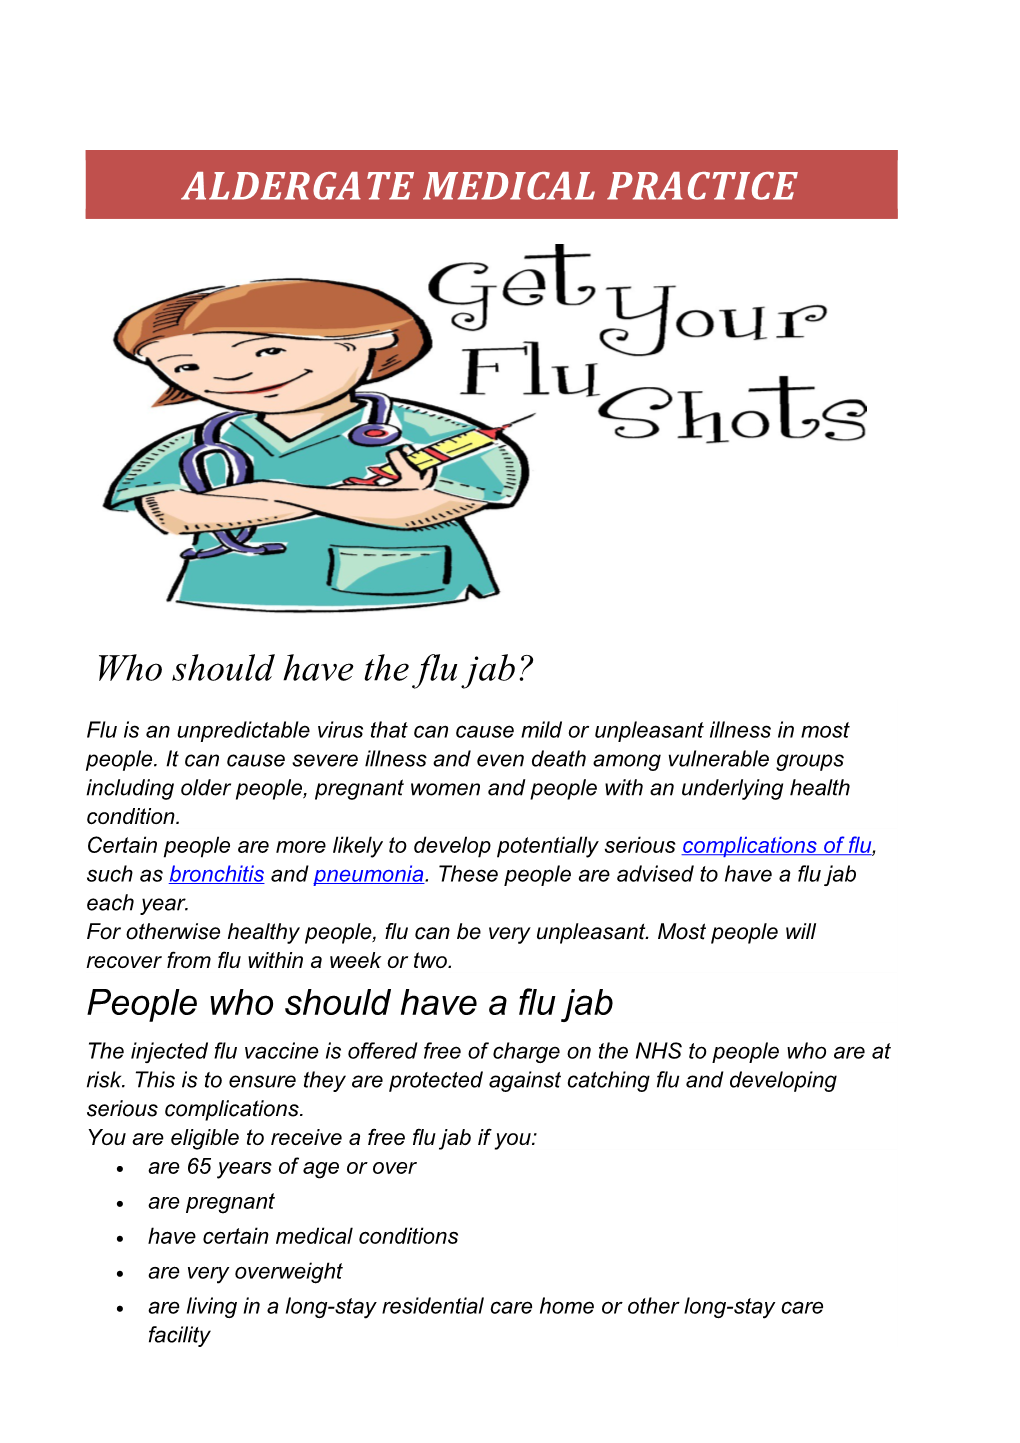 Who Should Have the Flu Jab?